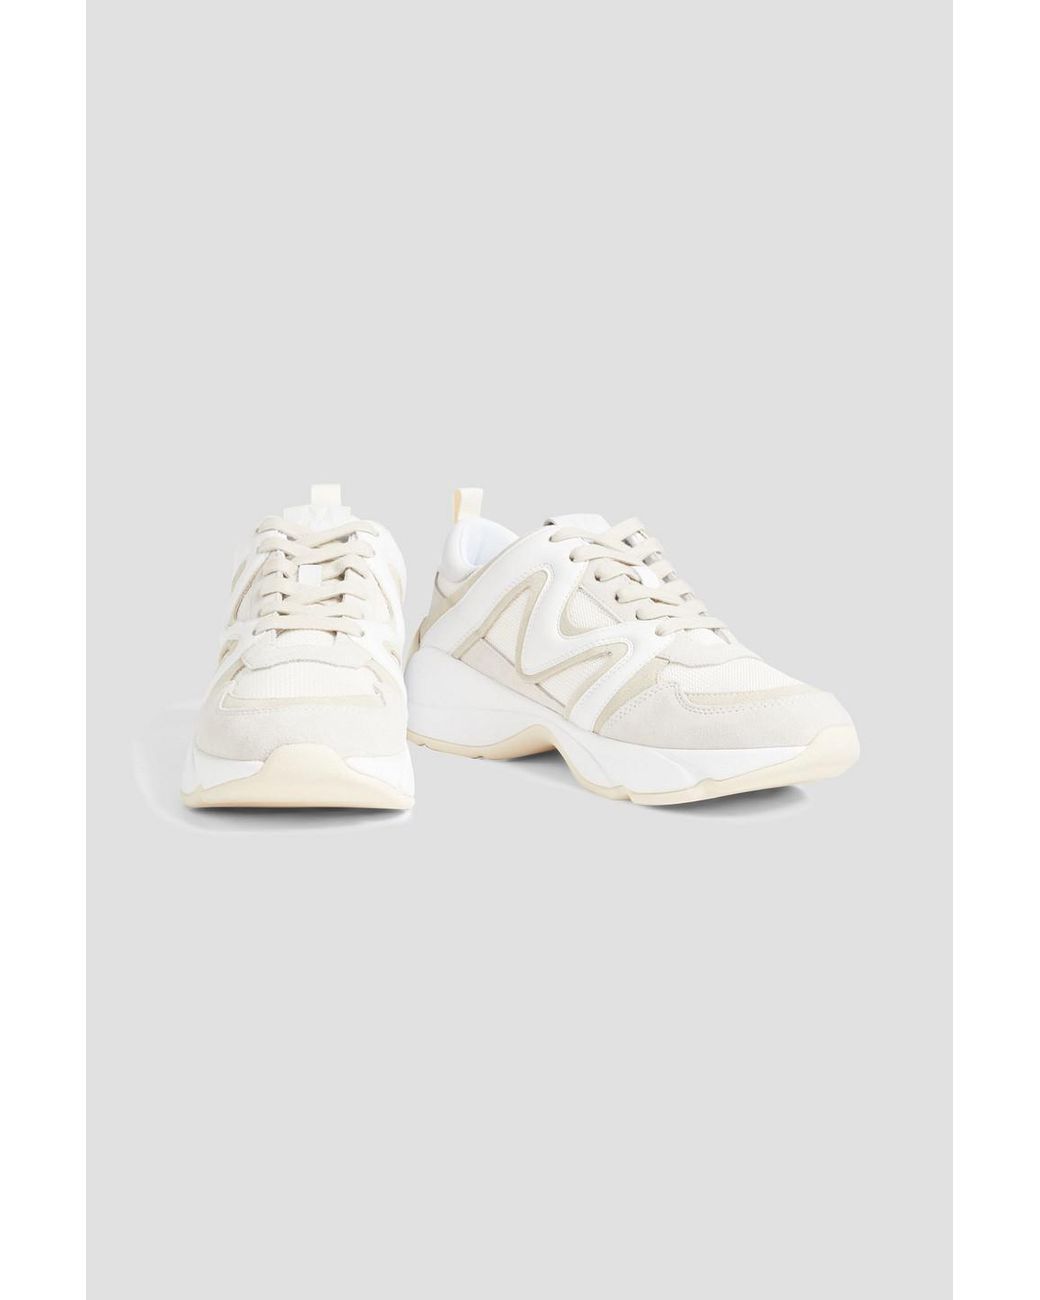 Maje Mesh, Suede And Leather Sneakers in White | Lyst